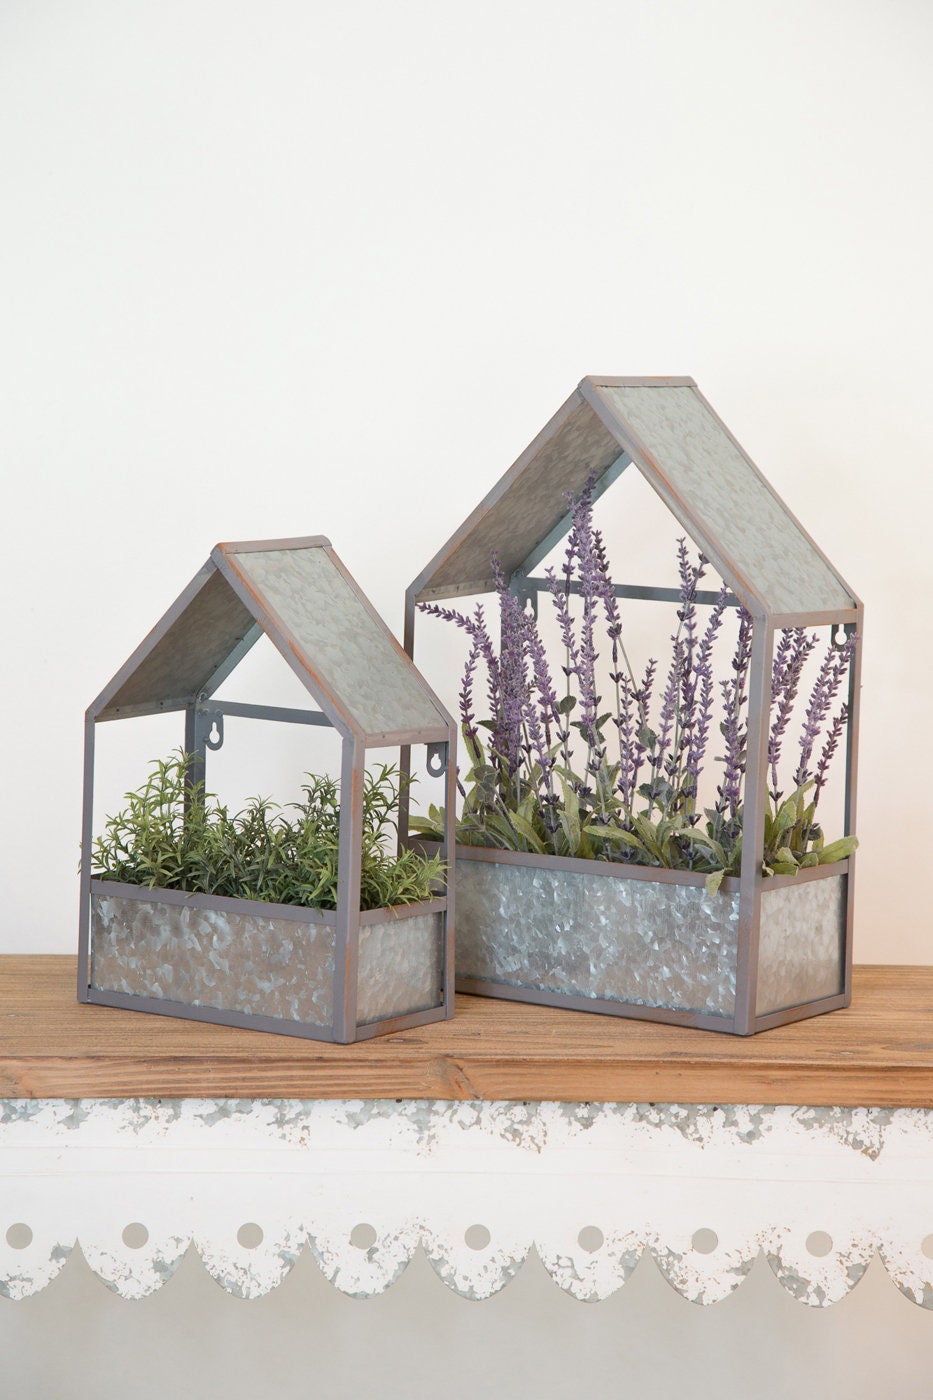 Set of 2 Metal House Shaped Planters, Rustic Home Decor